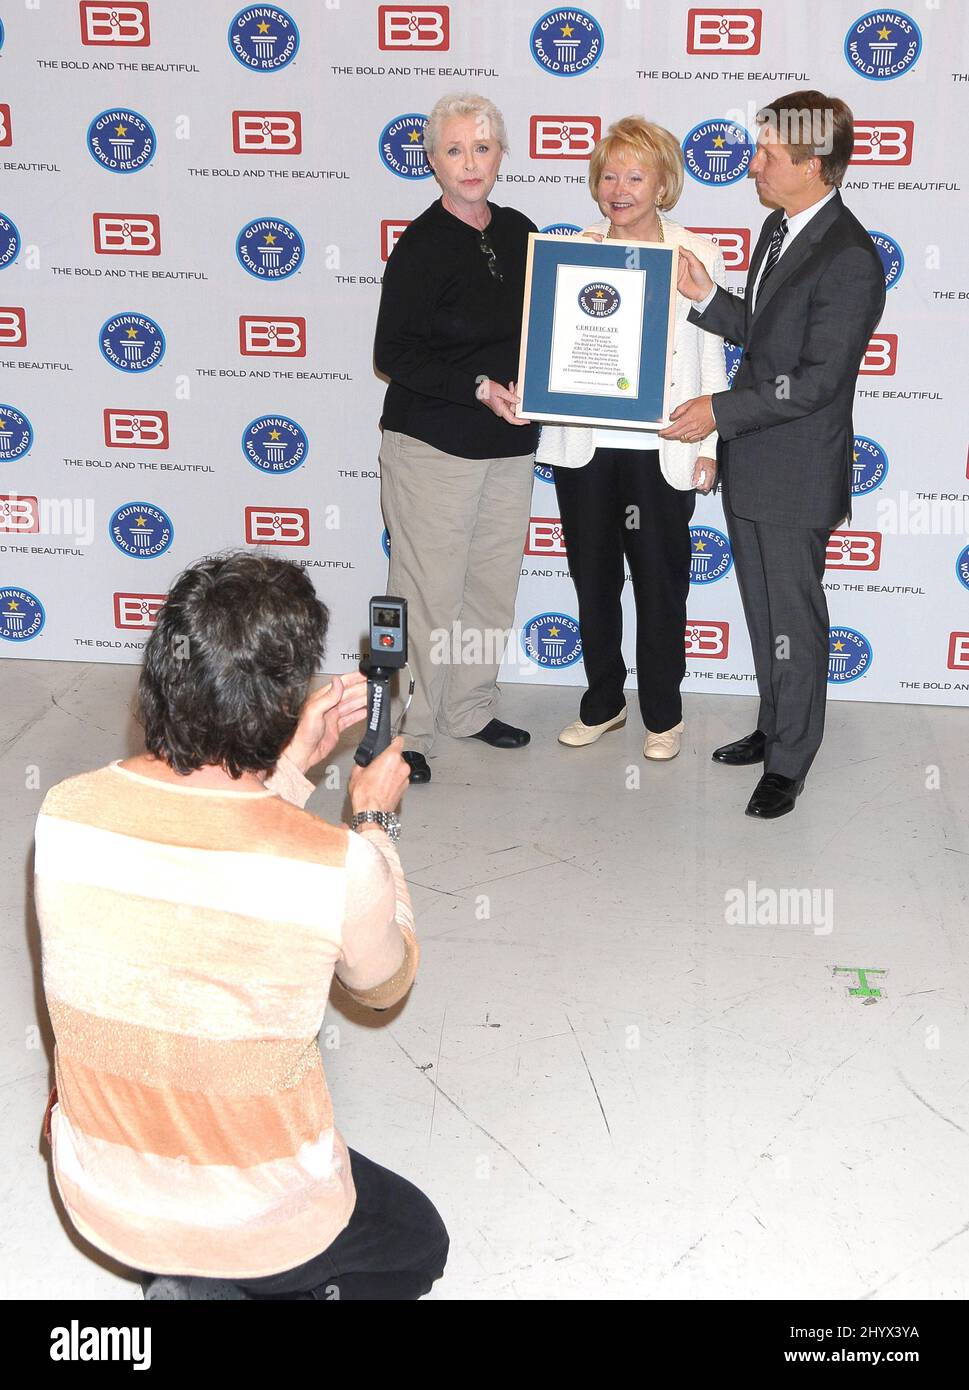 Susan Flannery, Ronn Moss, Lee Phillip Bell and Bradley Bell during Guinness World Records announcement of 'The Bold and the Beautiful' as most popular daytime TV soap on stage 31 at CBS Television City, Los Angeles Stock Photo